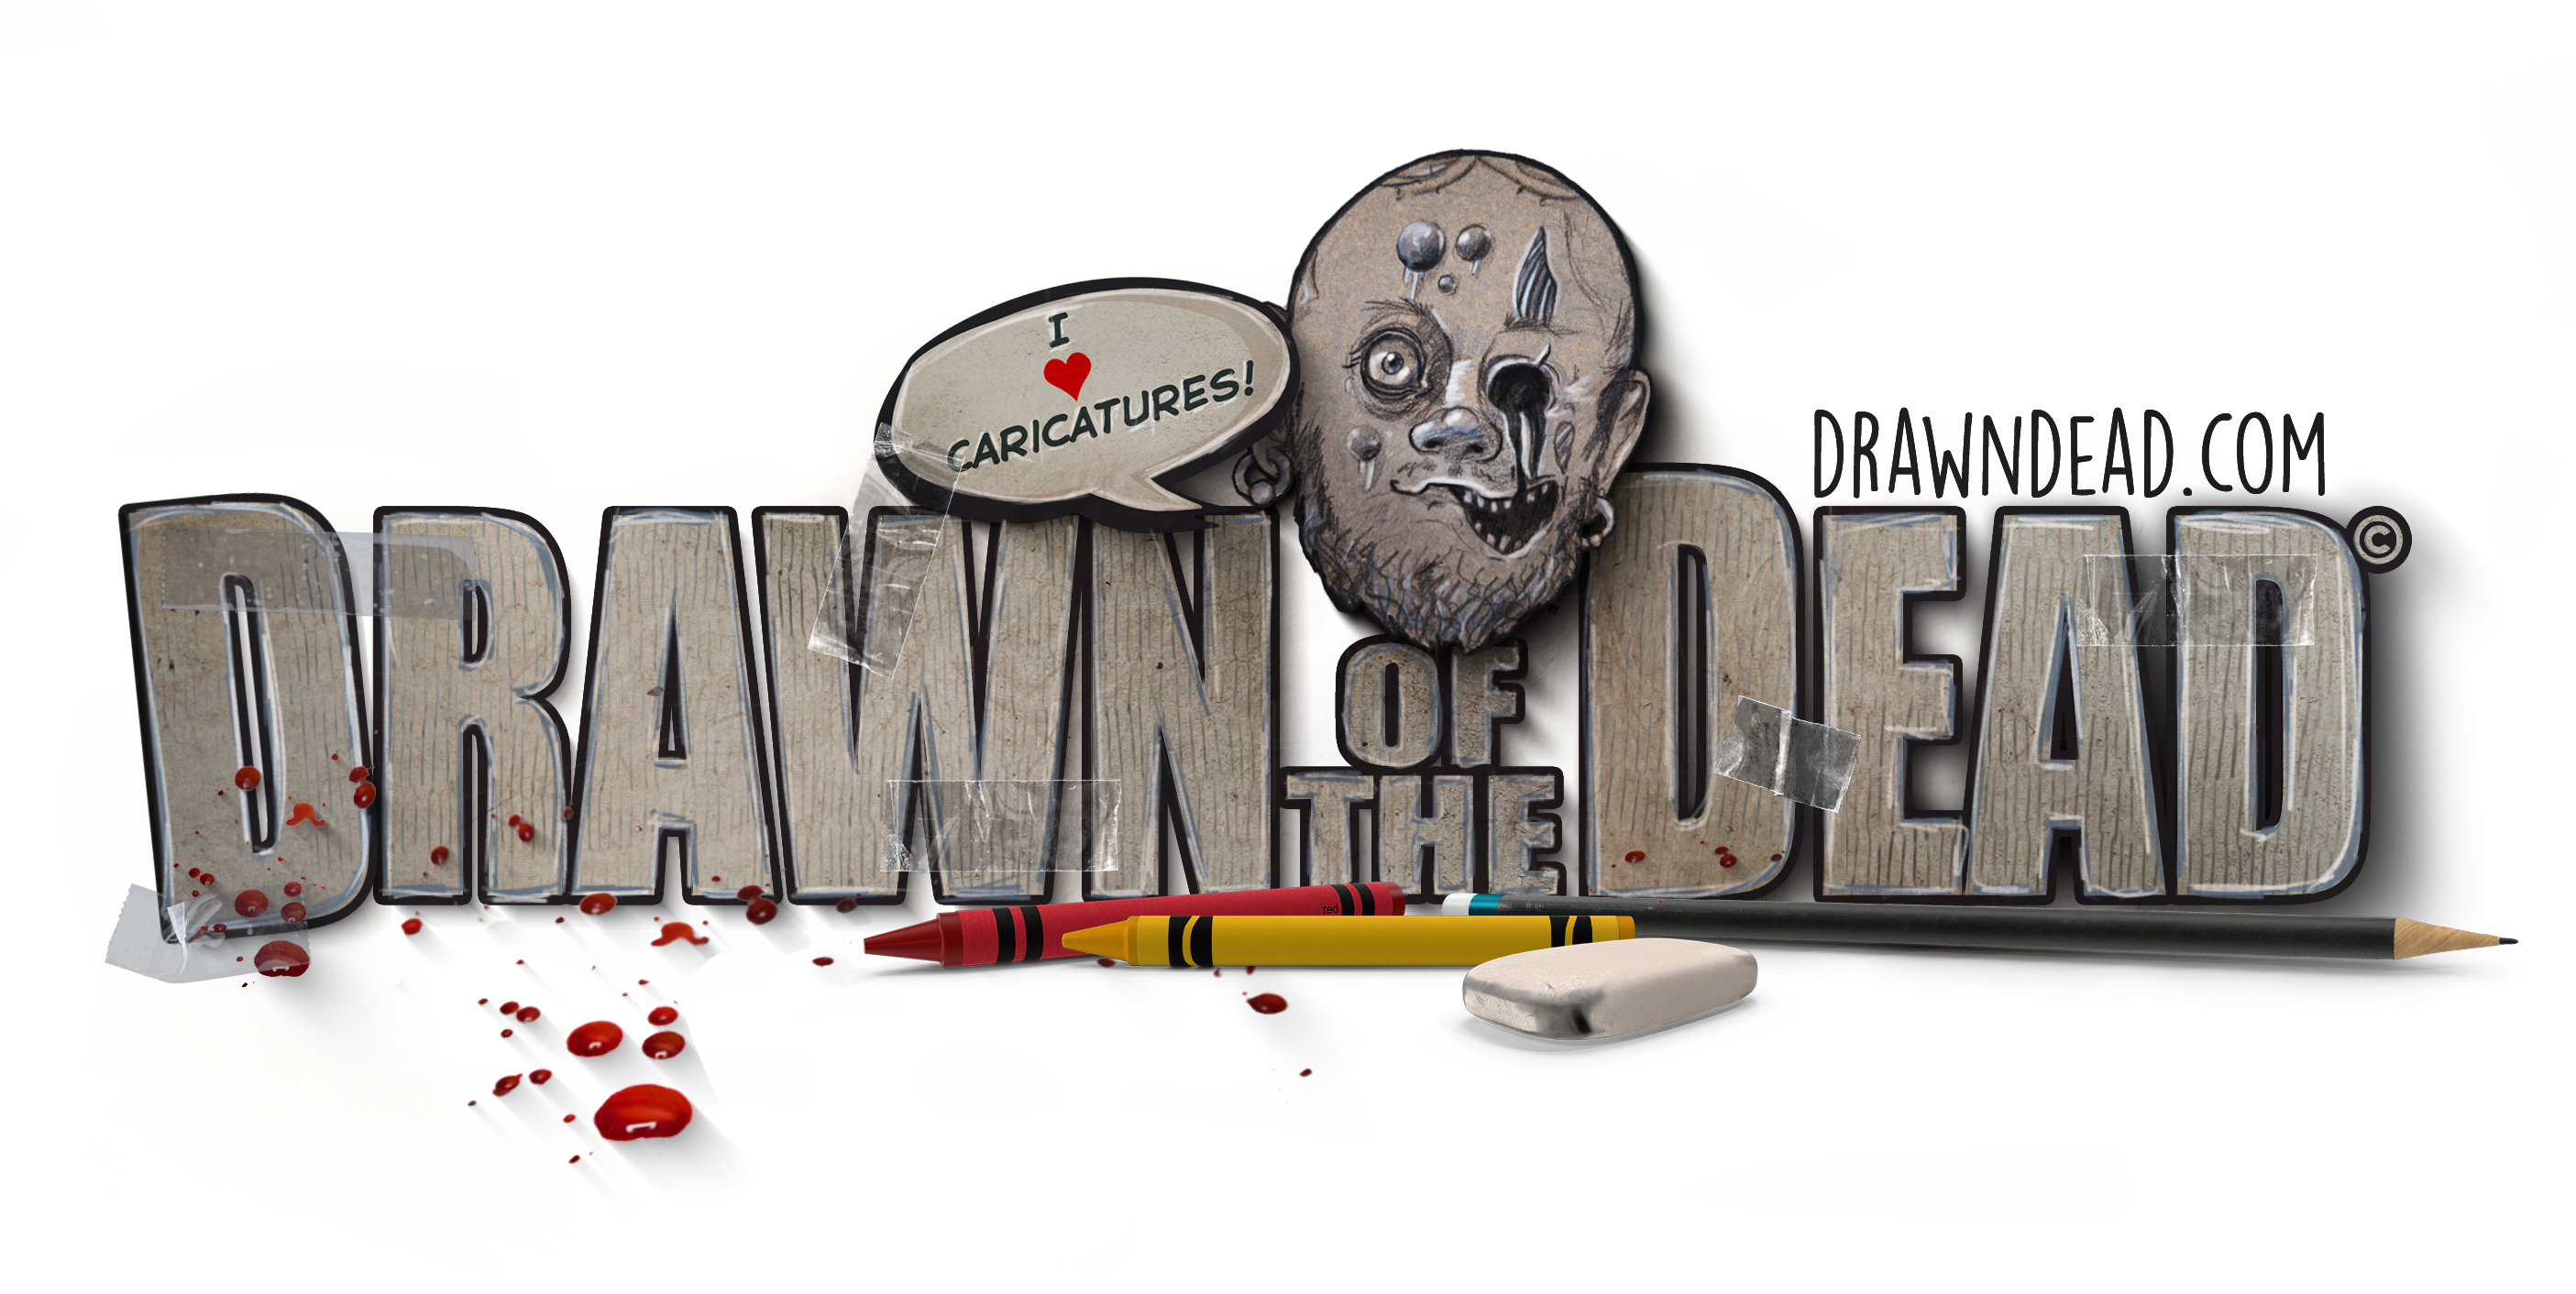 Drawn of the Dead Logo